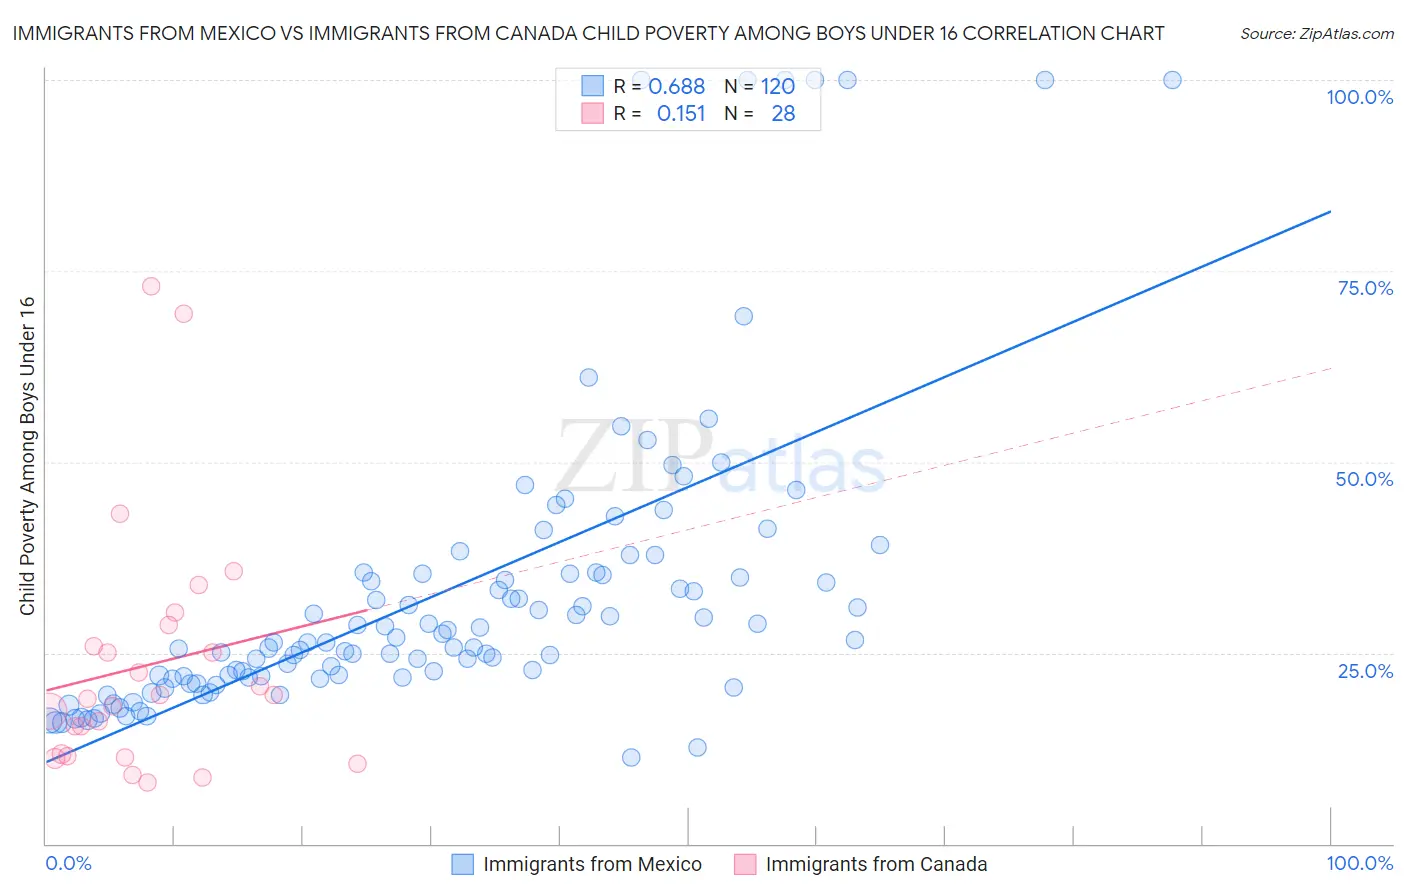 Immigrants from Mexico vs Immigrants from Canada Child Poverty Among Boys Under 16